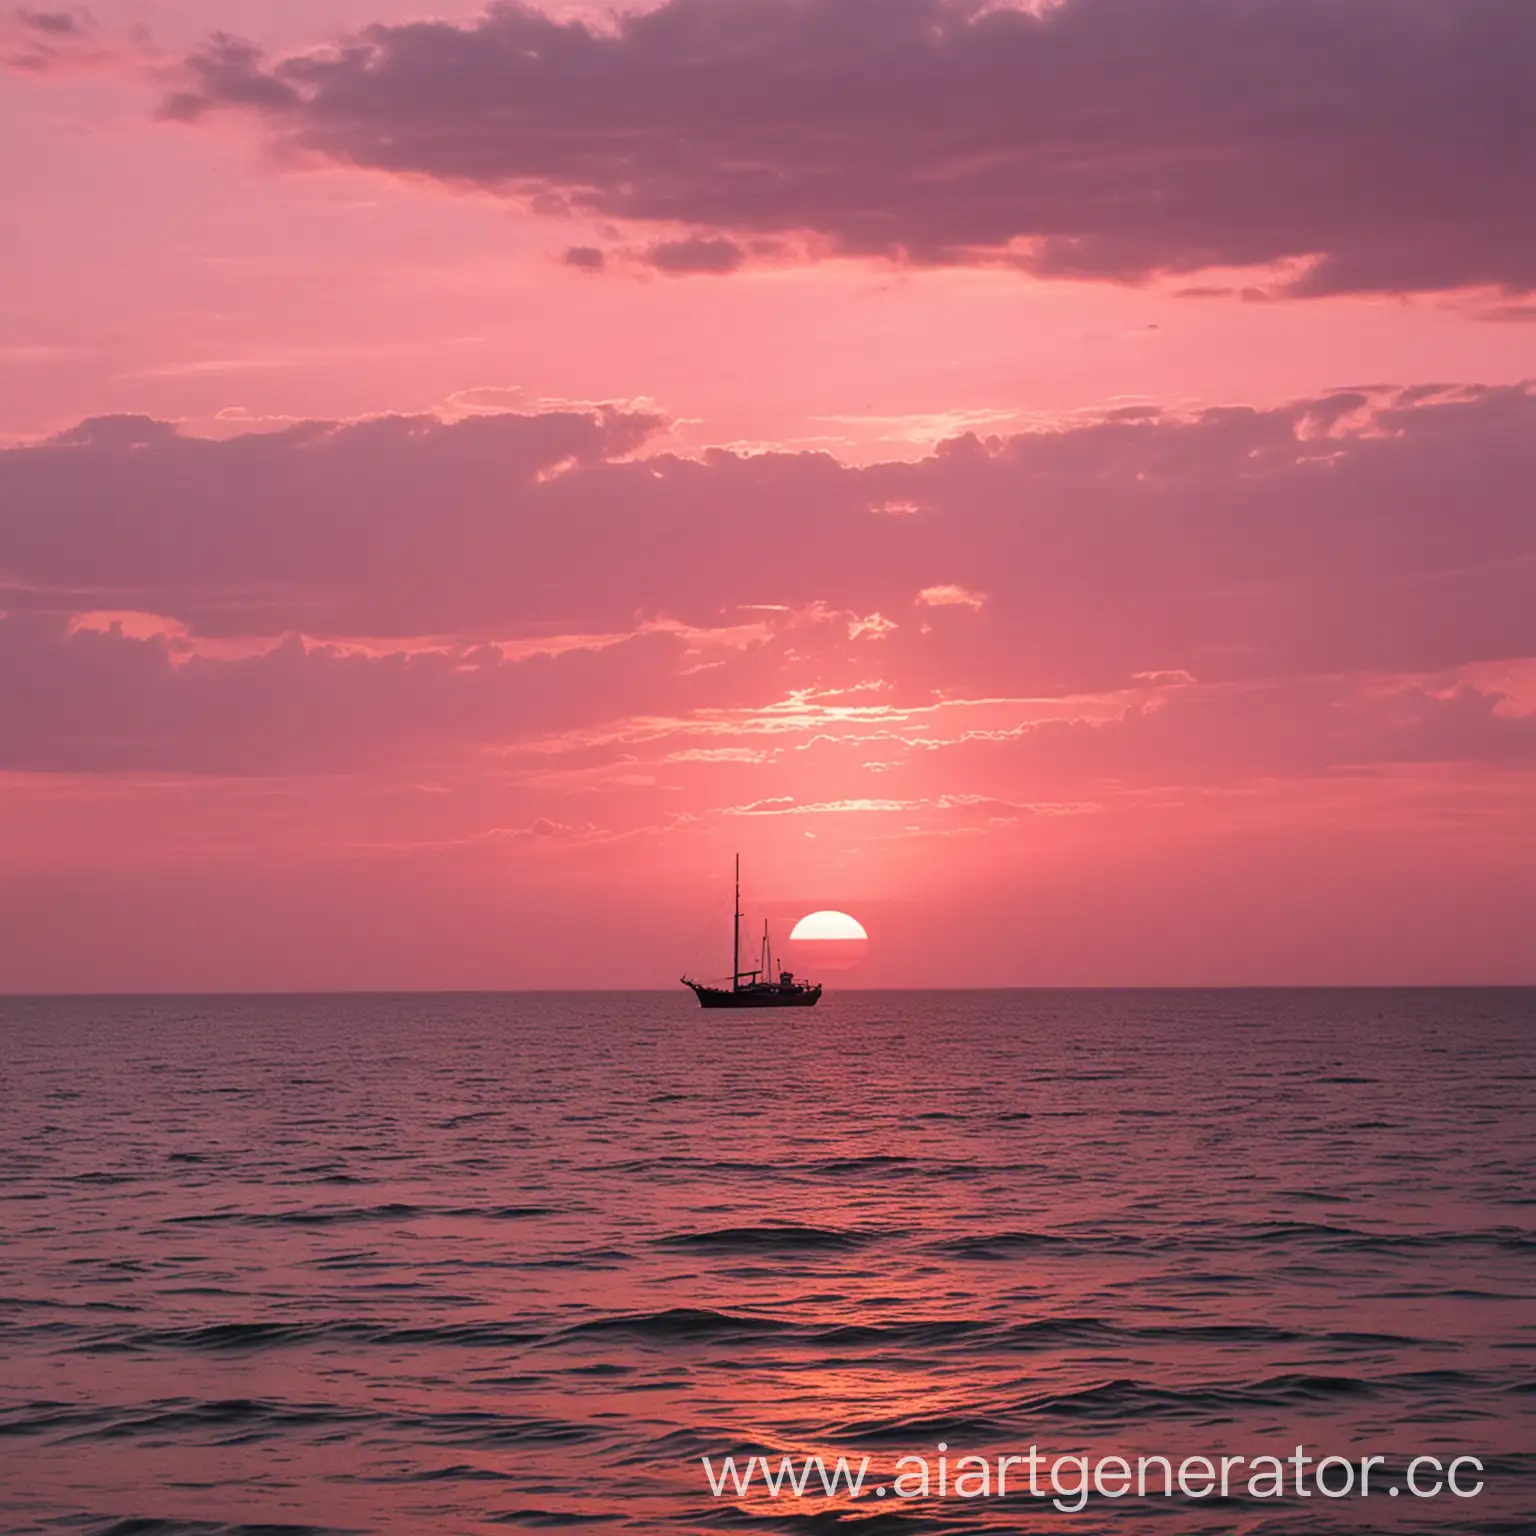 pink sunset on the sea with a ship